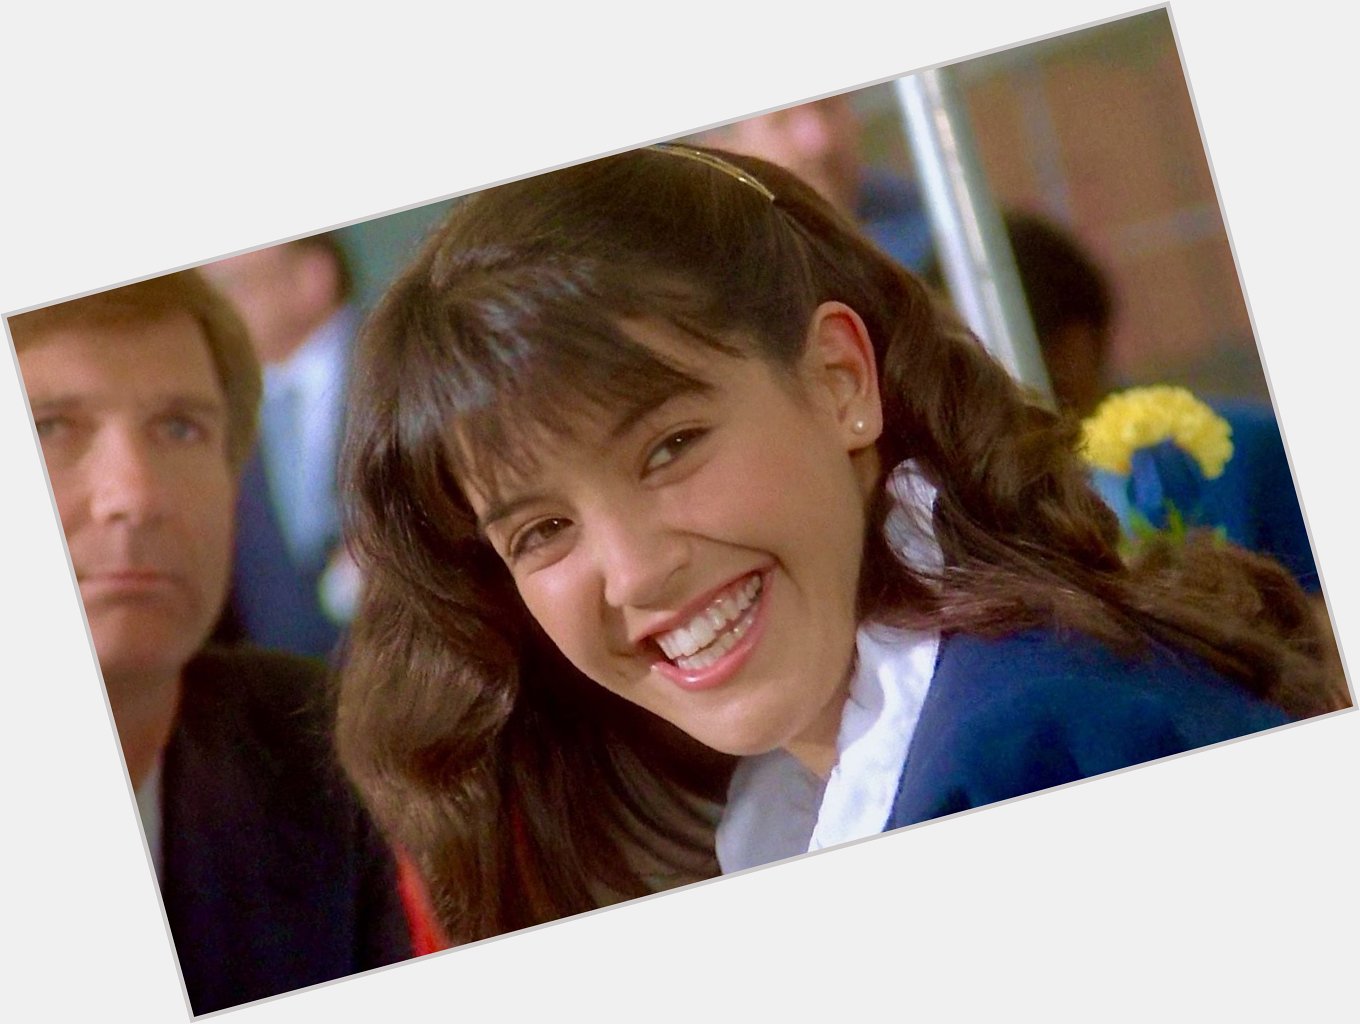 Happy birthday, Phoebe Cates.

Make more movies. We miss you!  